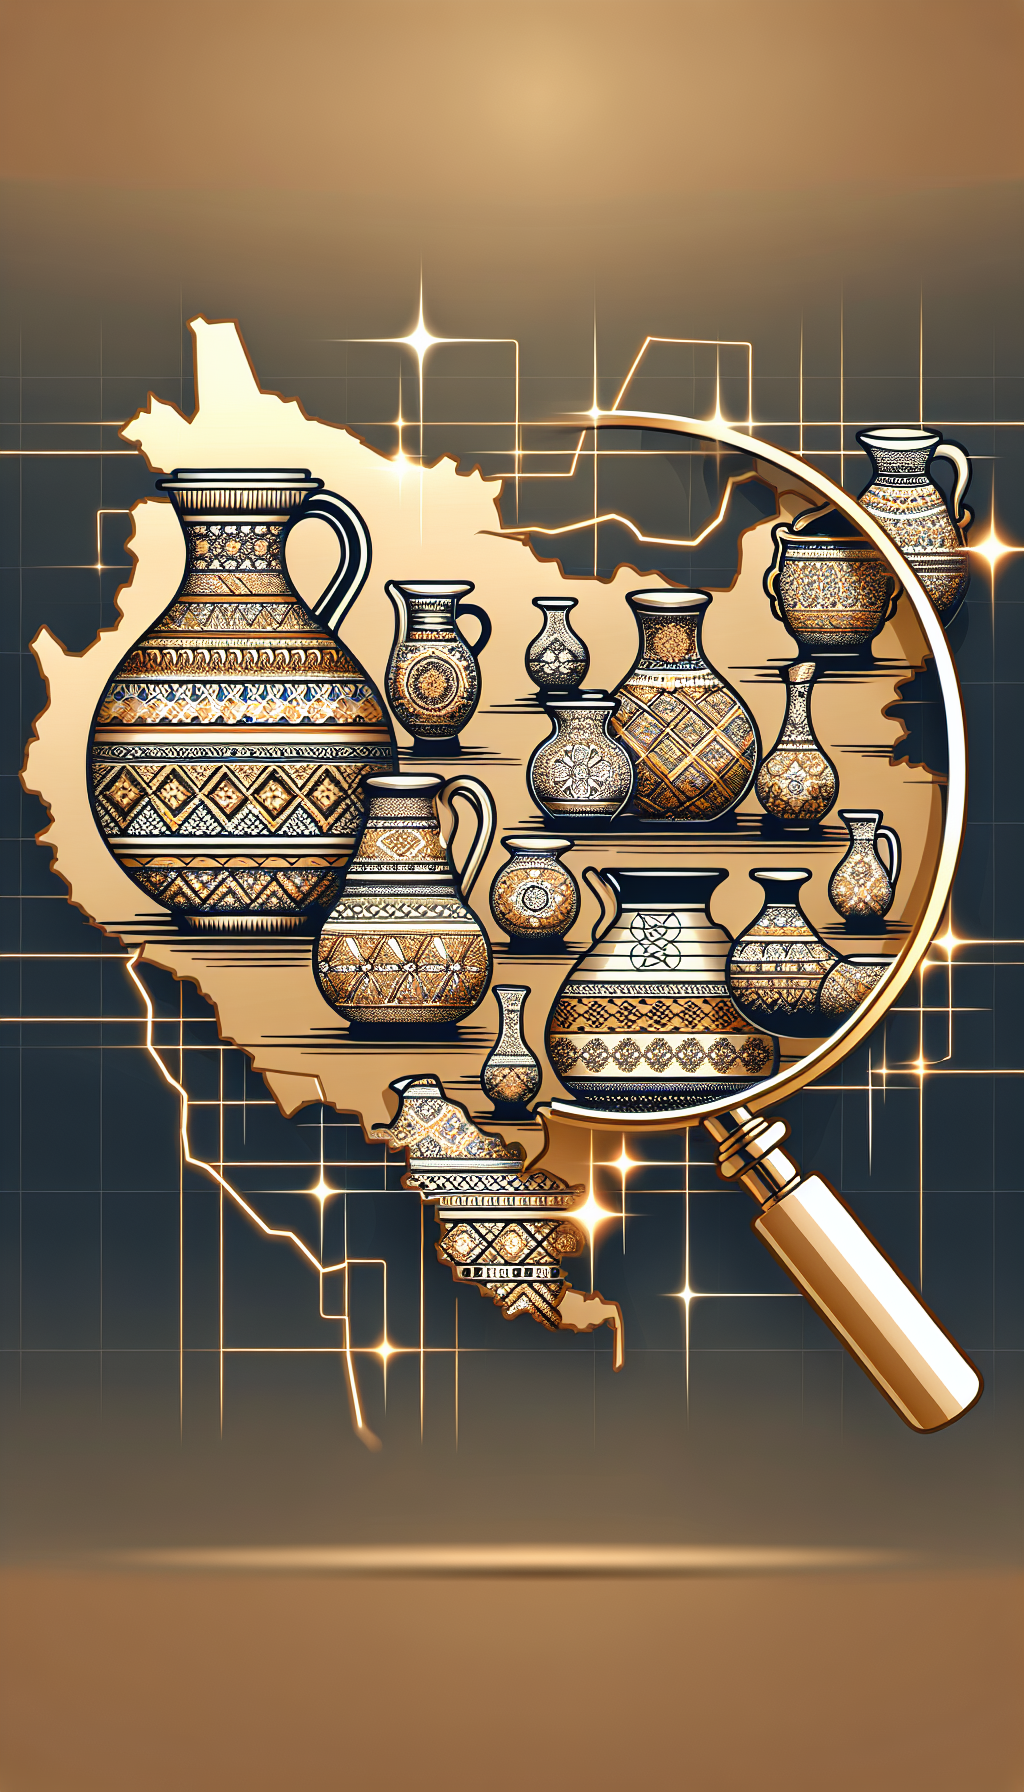 An illustration depicting a stylized map with various antique crocks and jugs perched on top of key geographical regions; each crock displays distinct patterns or motifs symbolizing the local style. The map is intertwined with golden lines symbolizing the fluctuation in value, and a magnifying glass hovers over a particularly ornate crock, highlighting the concept of regional influence on antique value.